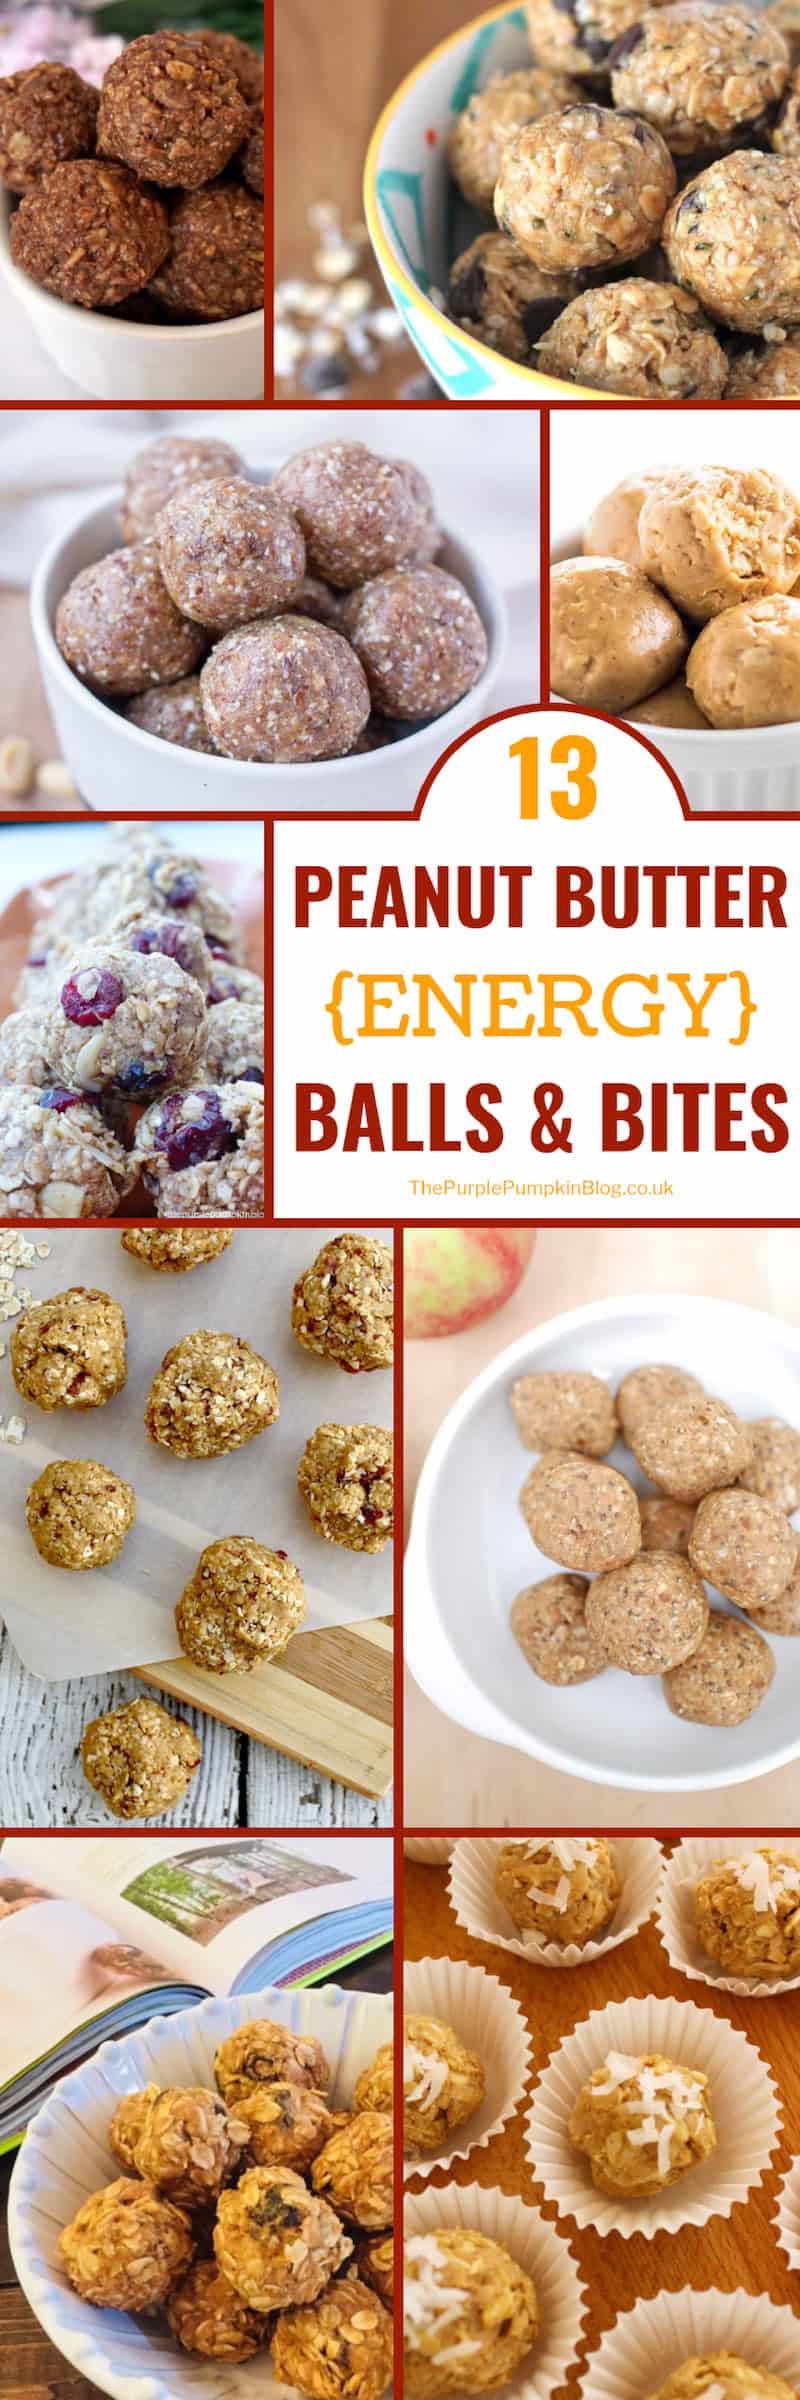 For when you are craving something sweet, but on the healthier side, why not turn to one of these 13 Peanut Butter Energy Balls & Bites Recipes? This roundup of peanut butter energy balls and bites include: Low Carb; Keto; Gluten-Free, Sugar-Free, Grain-Free, and Vegan recipes. They are also all no-bake, making them so simple and quick to prepare! #PeanutButterEnergyBalls #EnergyBalls #lowcarb #keto #fatbombs